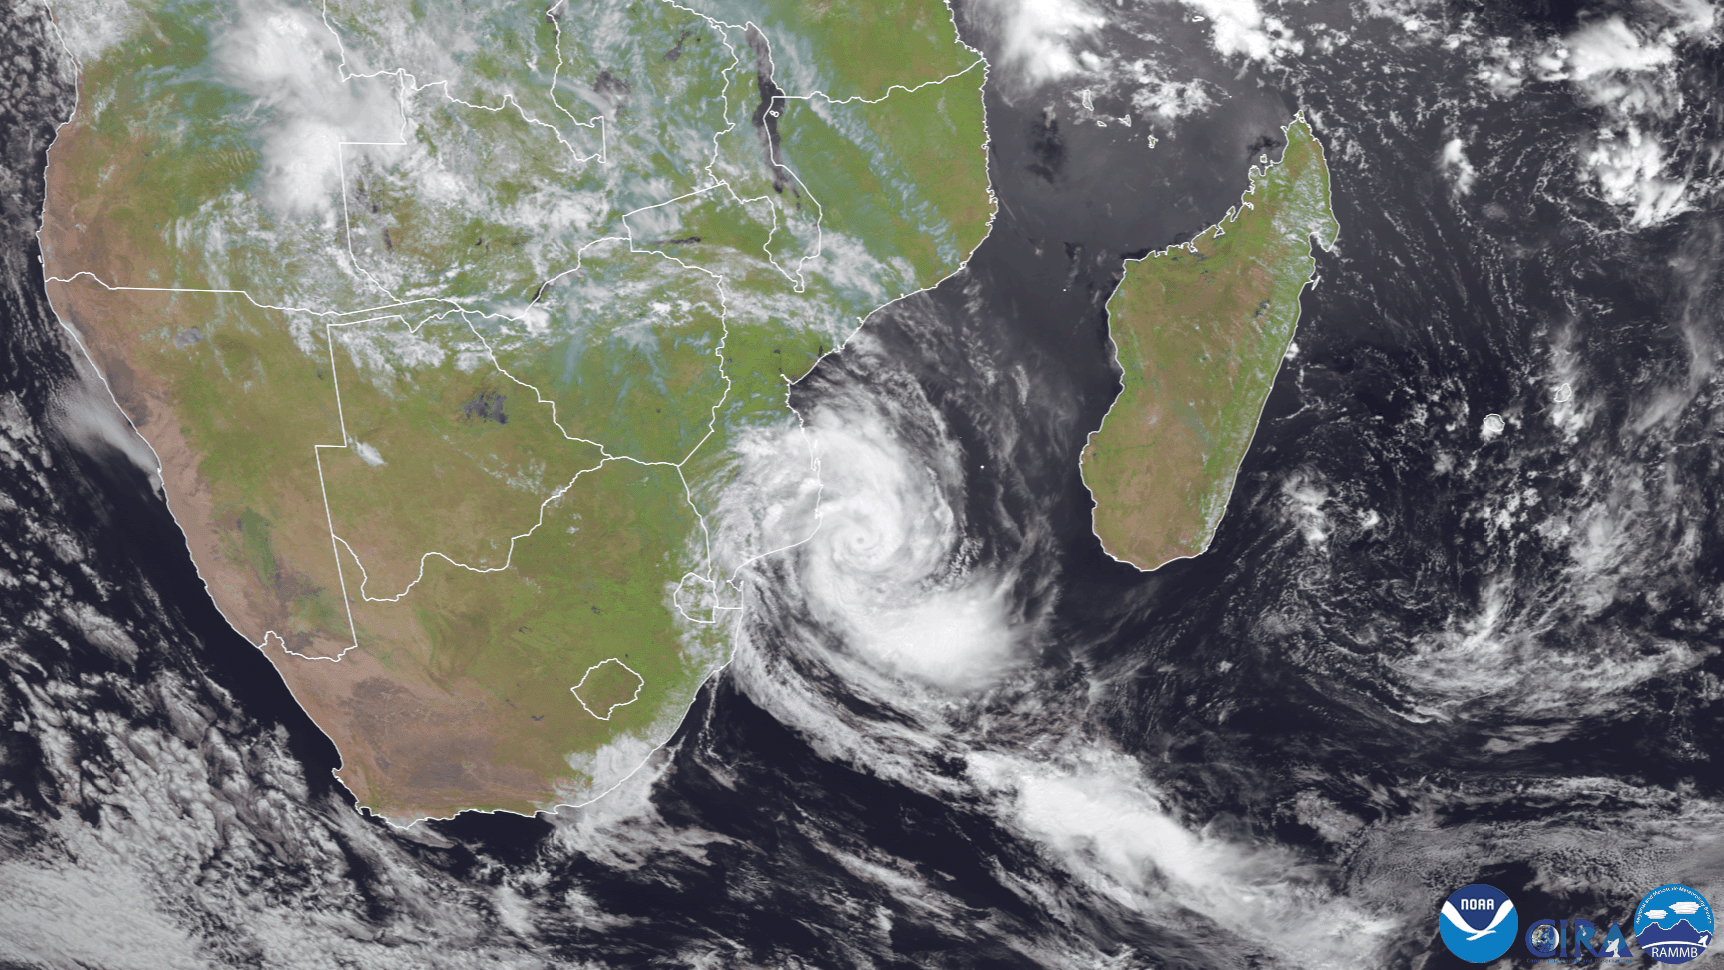 Image of a cyclone over Guambe